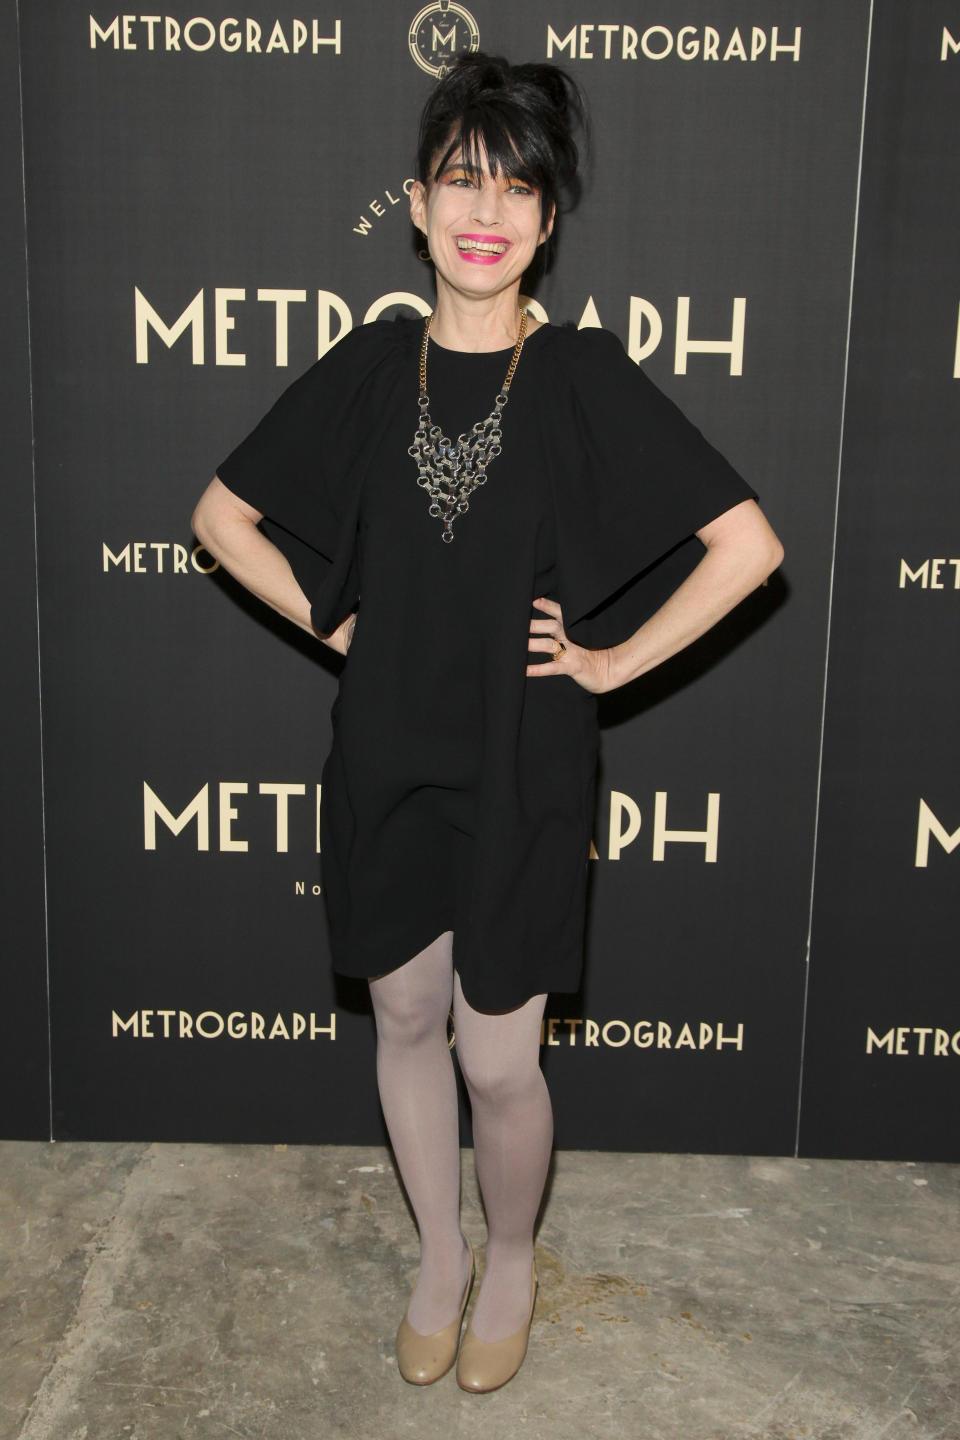 FILE - Kathleen Hanna attends the opening night of the Metrograph movie theater on March 2, 2016, in New York. Hanna released a memoir "Rebel Girl: My Life as a Feminist Punk." (Photo by Andy Kropa/Invision/AP, File)